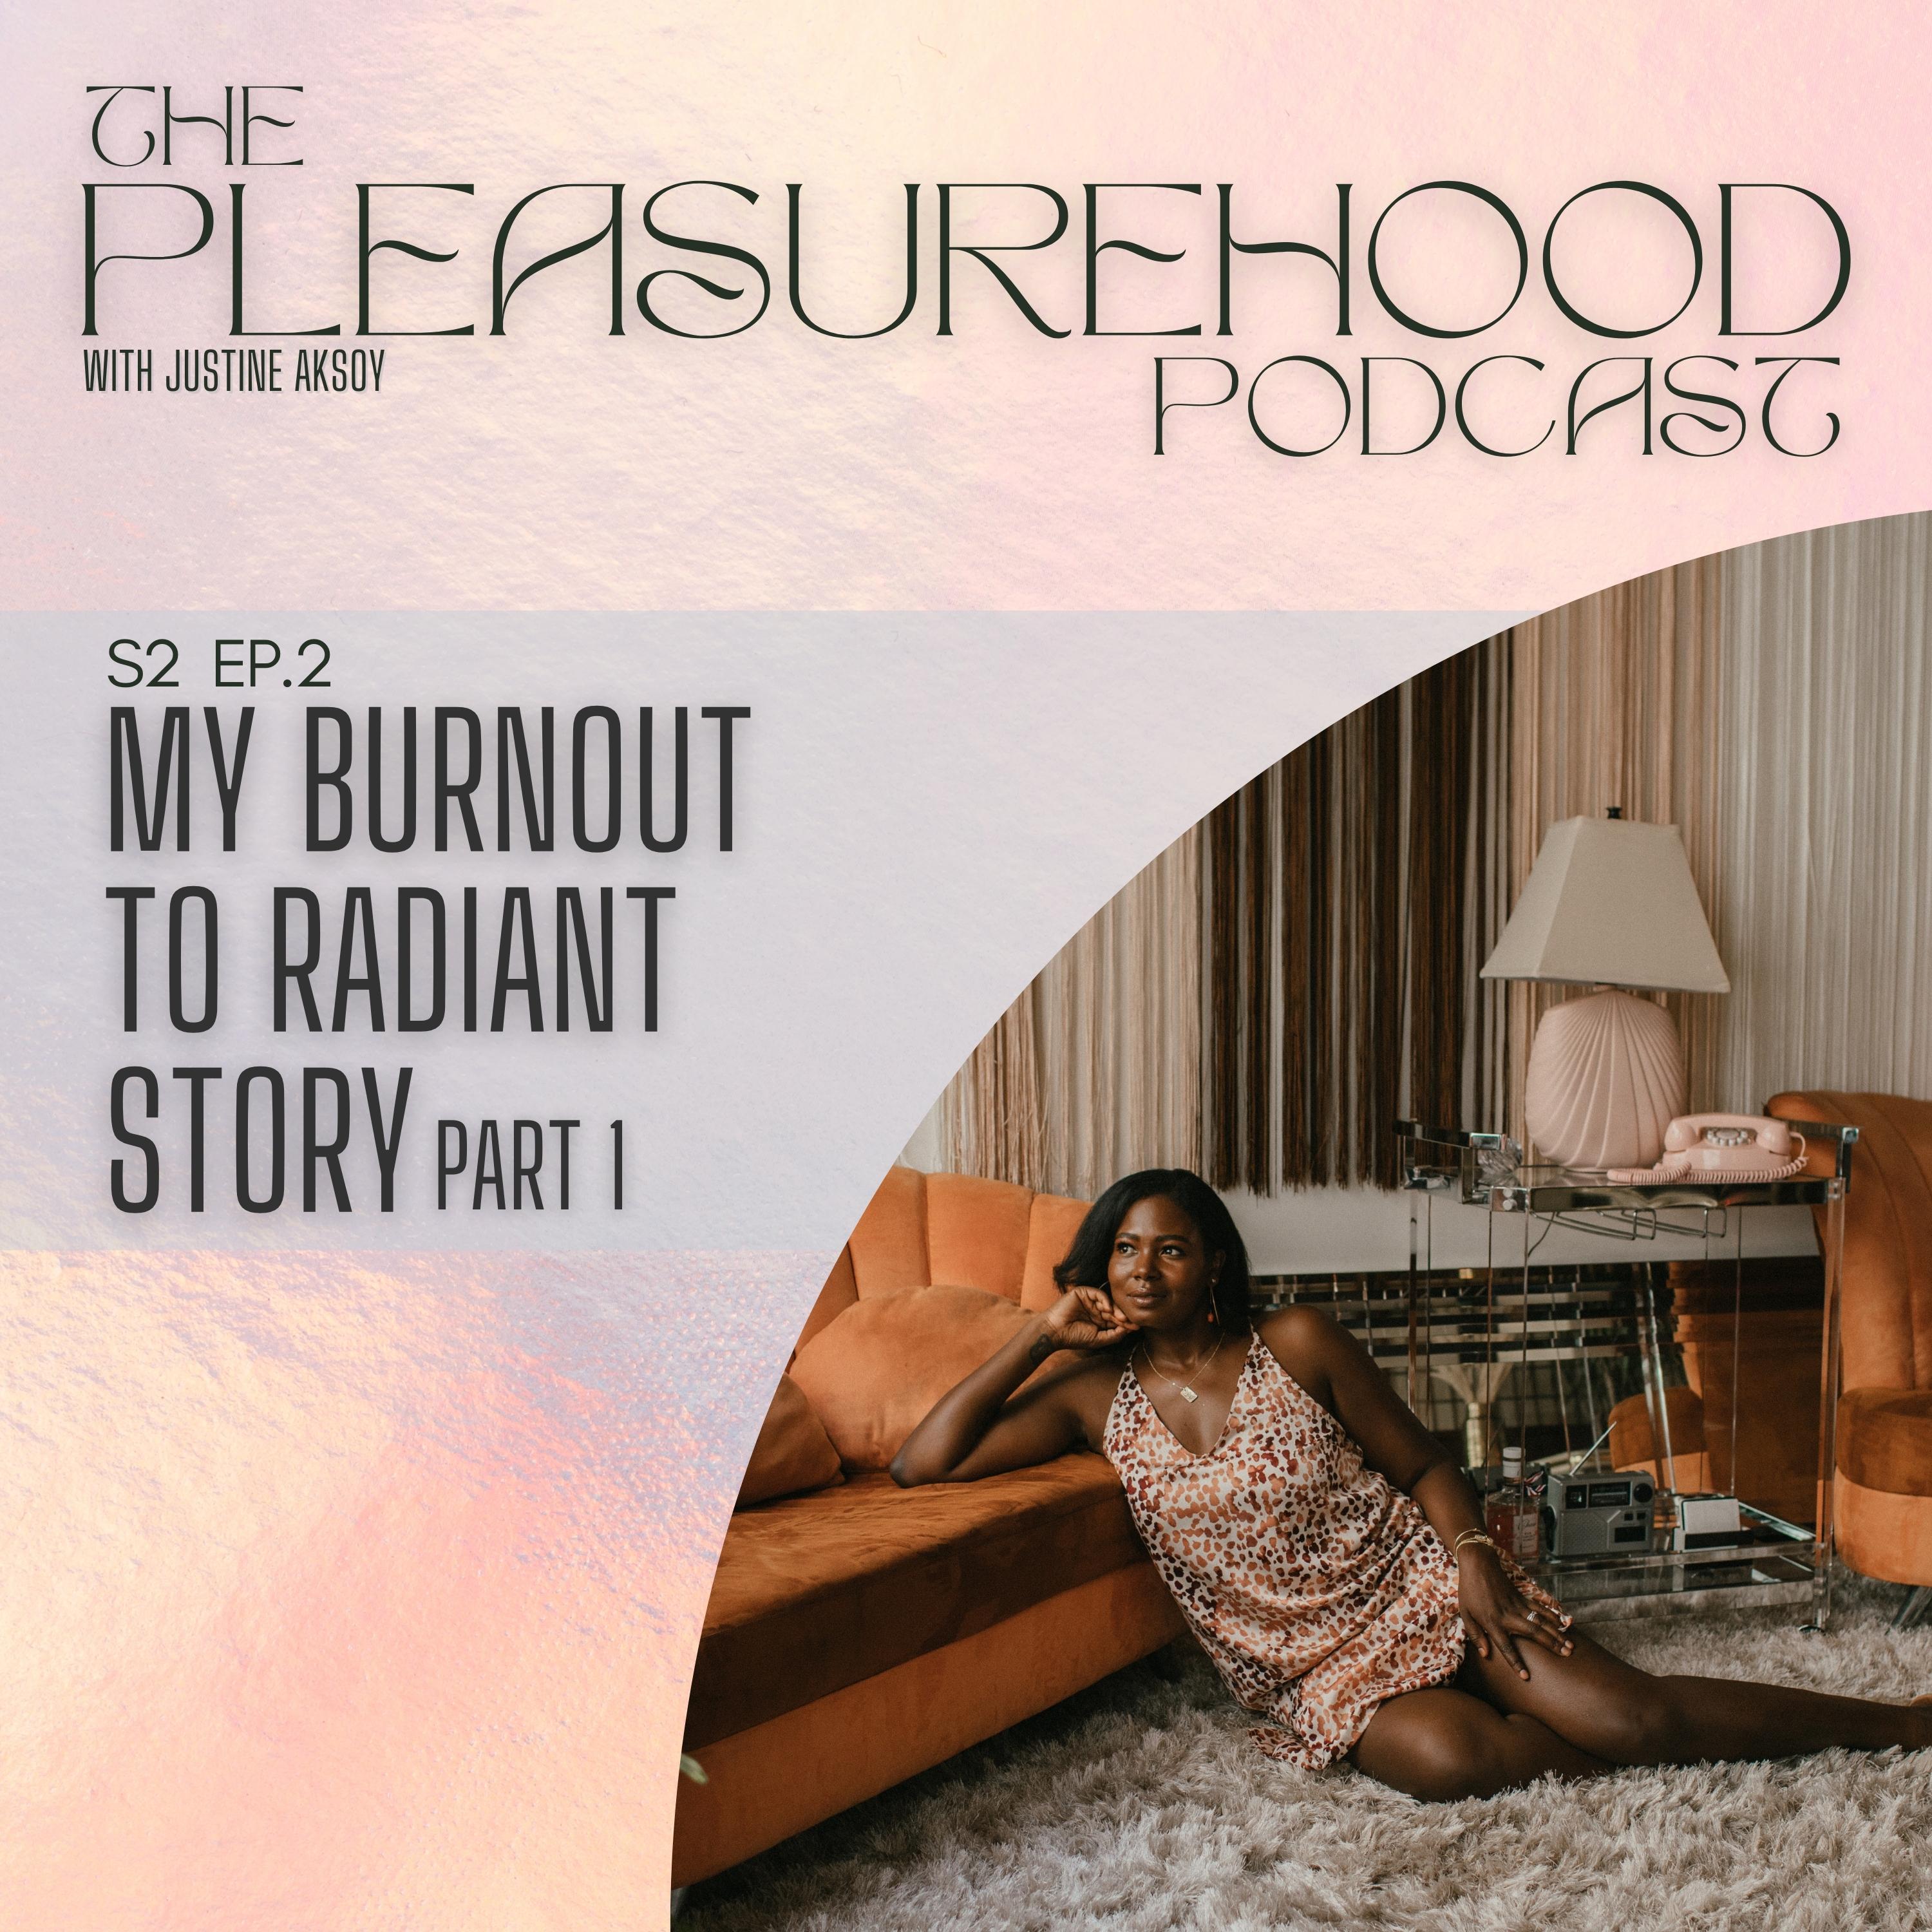 My Burnout to Radiant Story Part 1